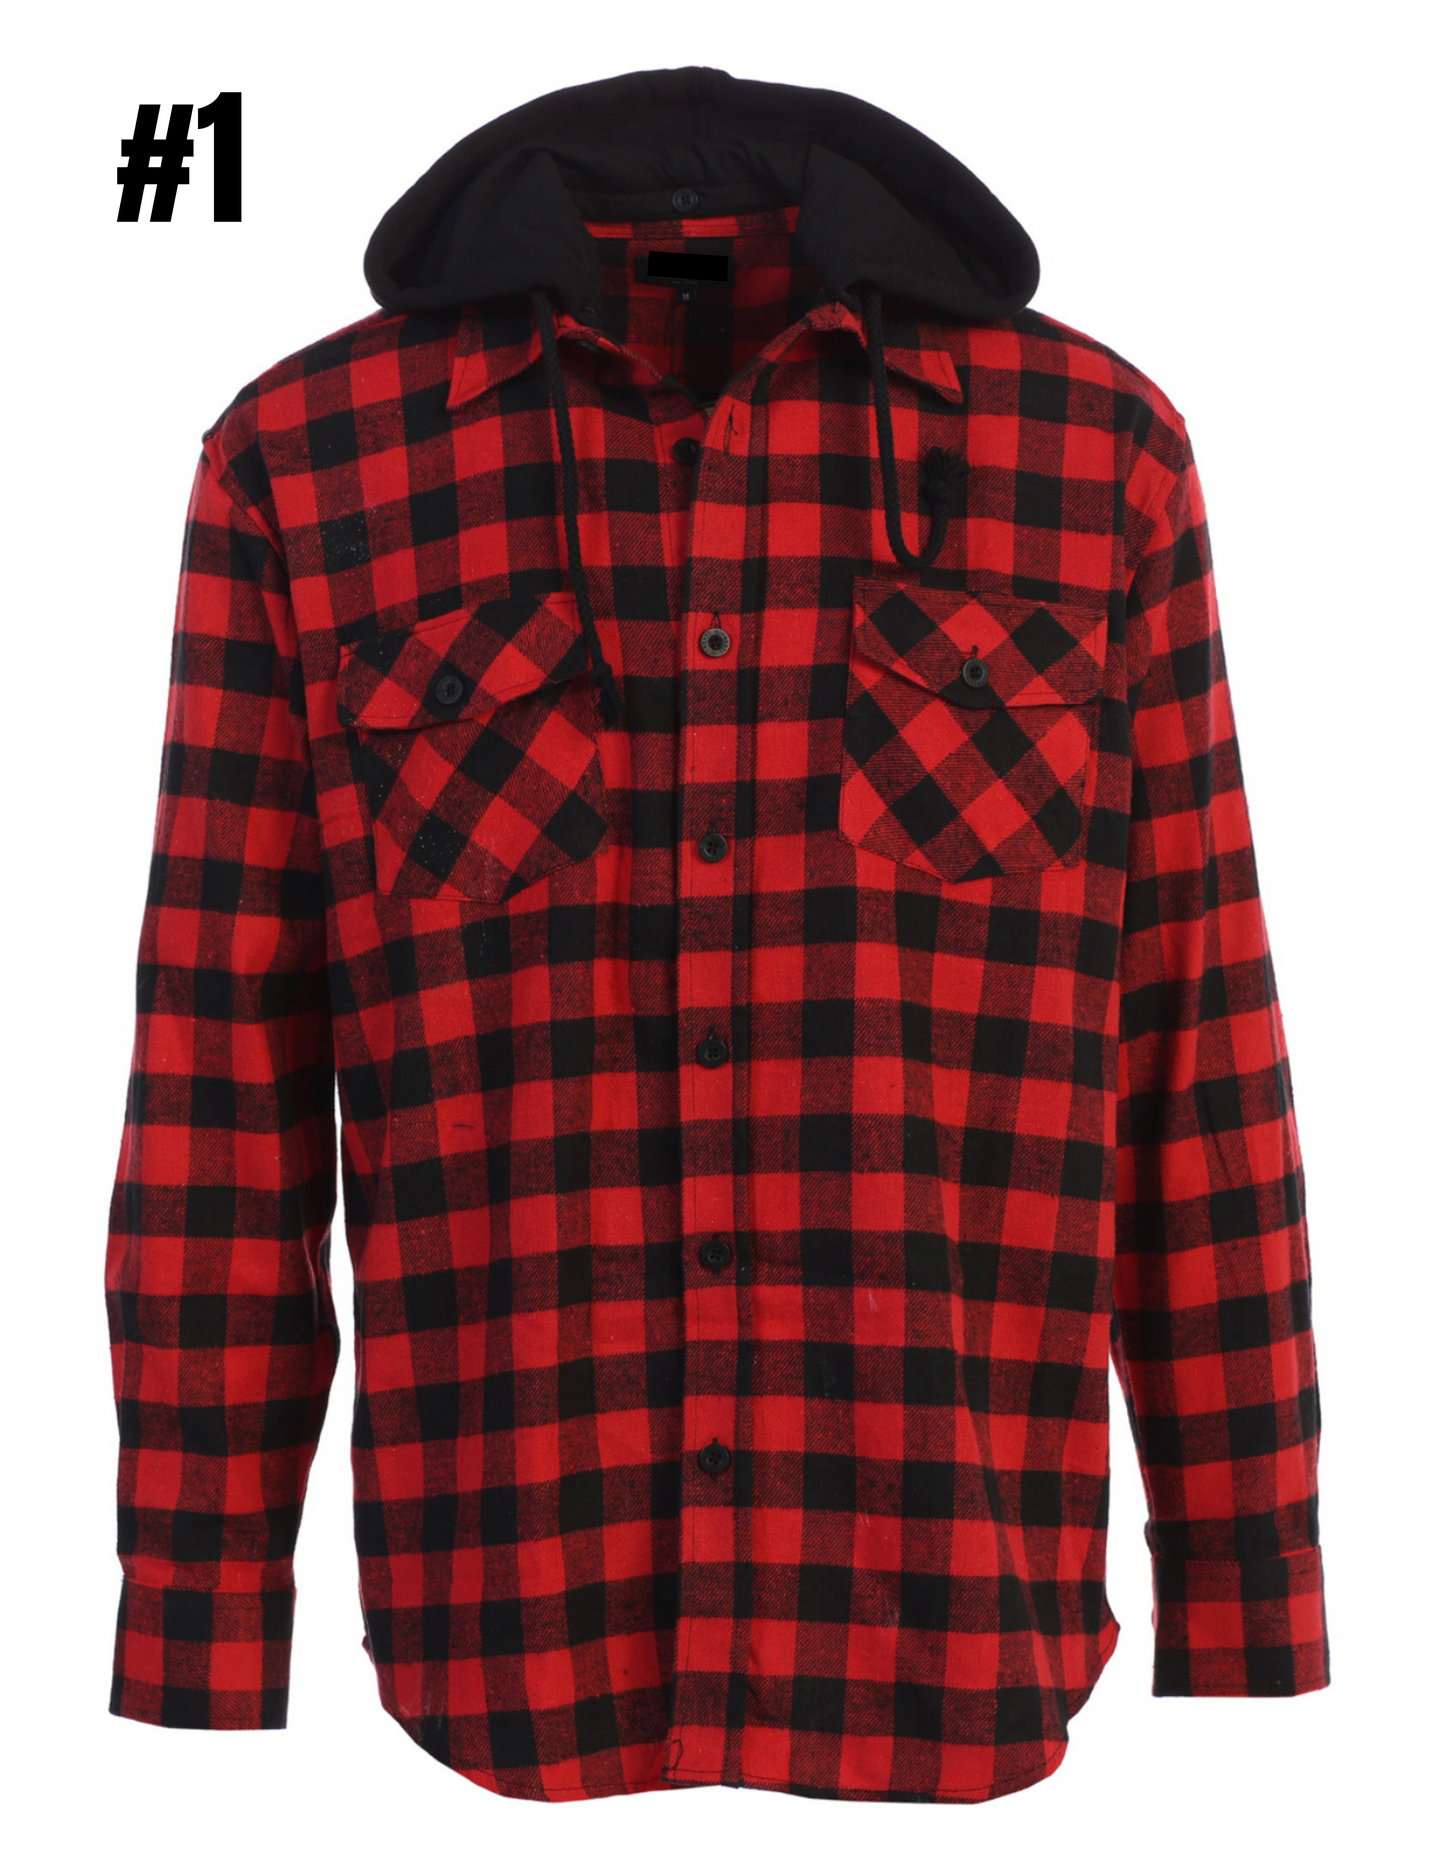 Men's Flannel Shirts With Removable Hoodie.